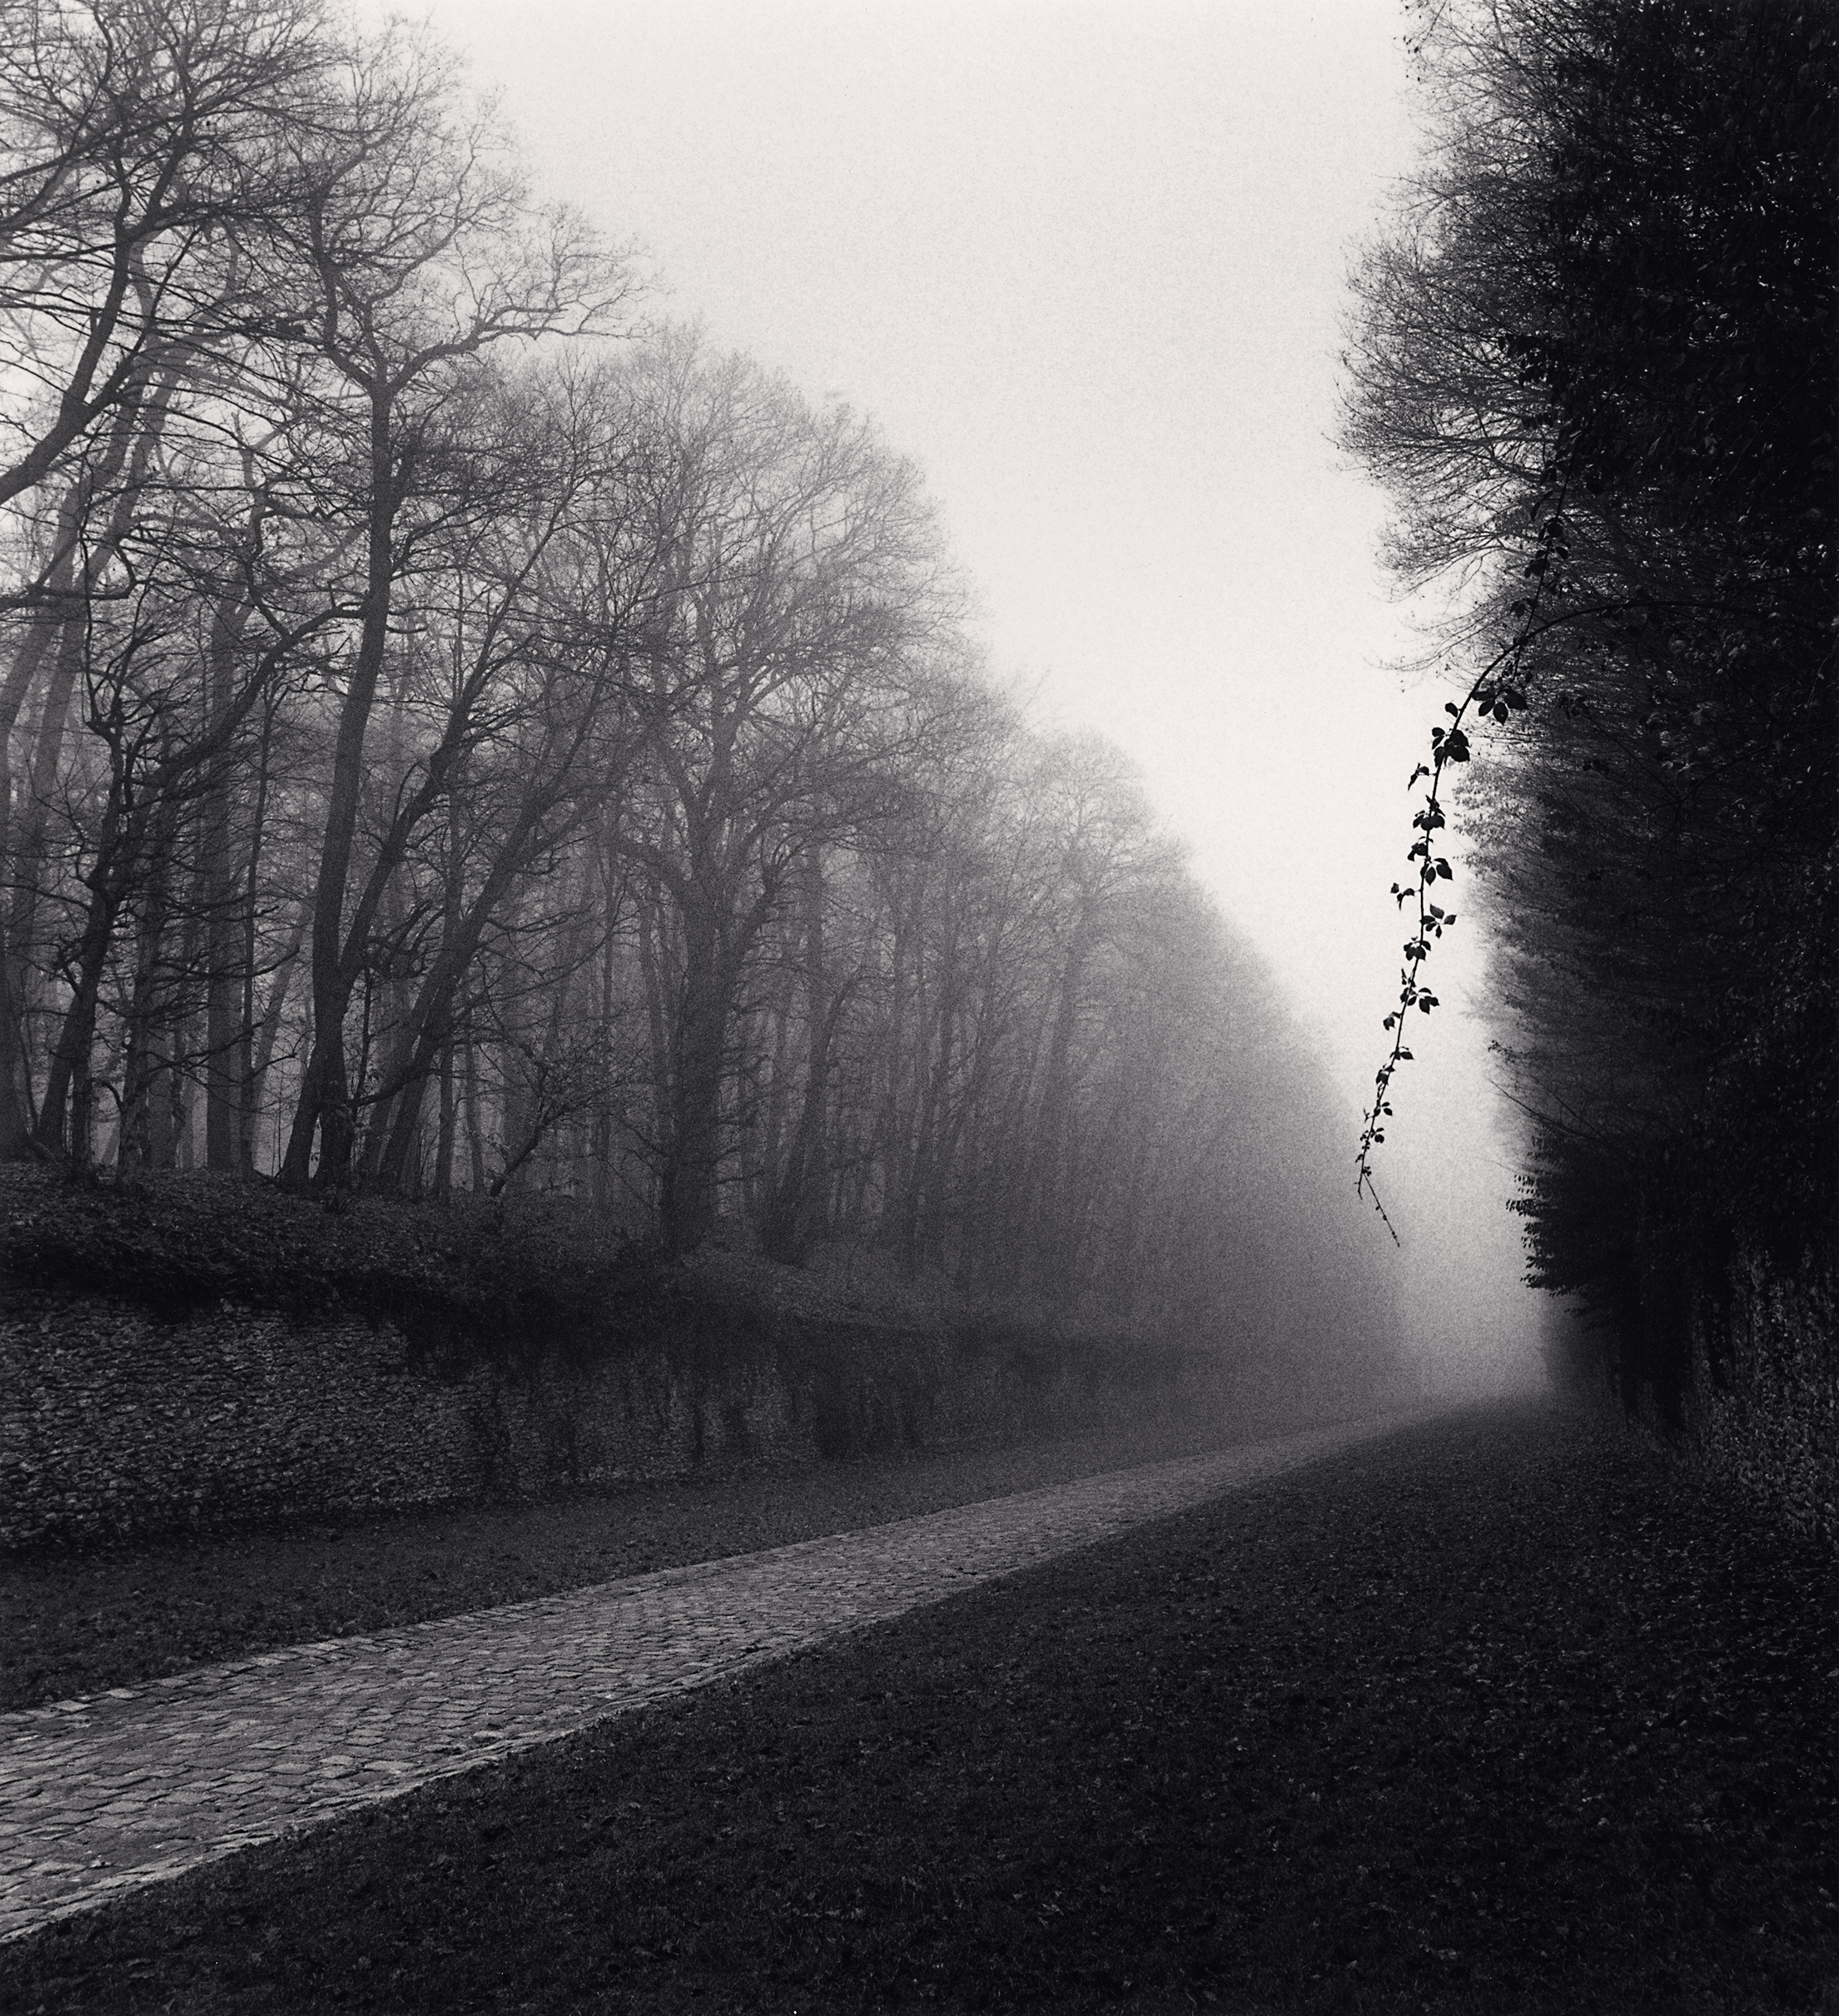 Michael Kenna, Suspended Vine, Marly, France, 1995, toned gelatin silver print, edition of 45, price on request